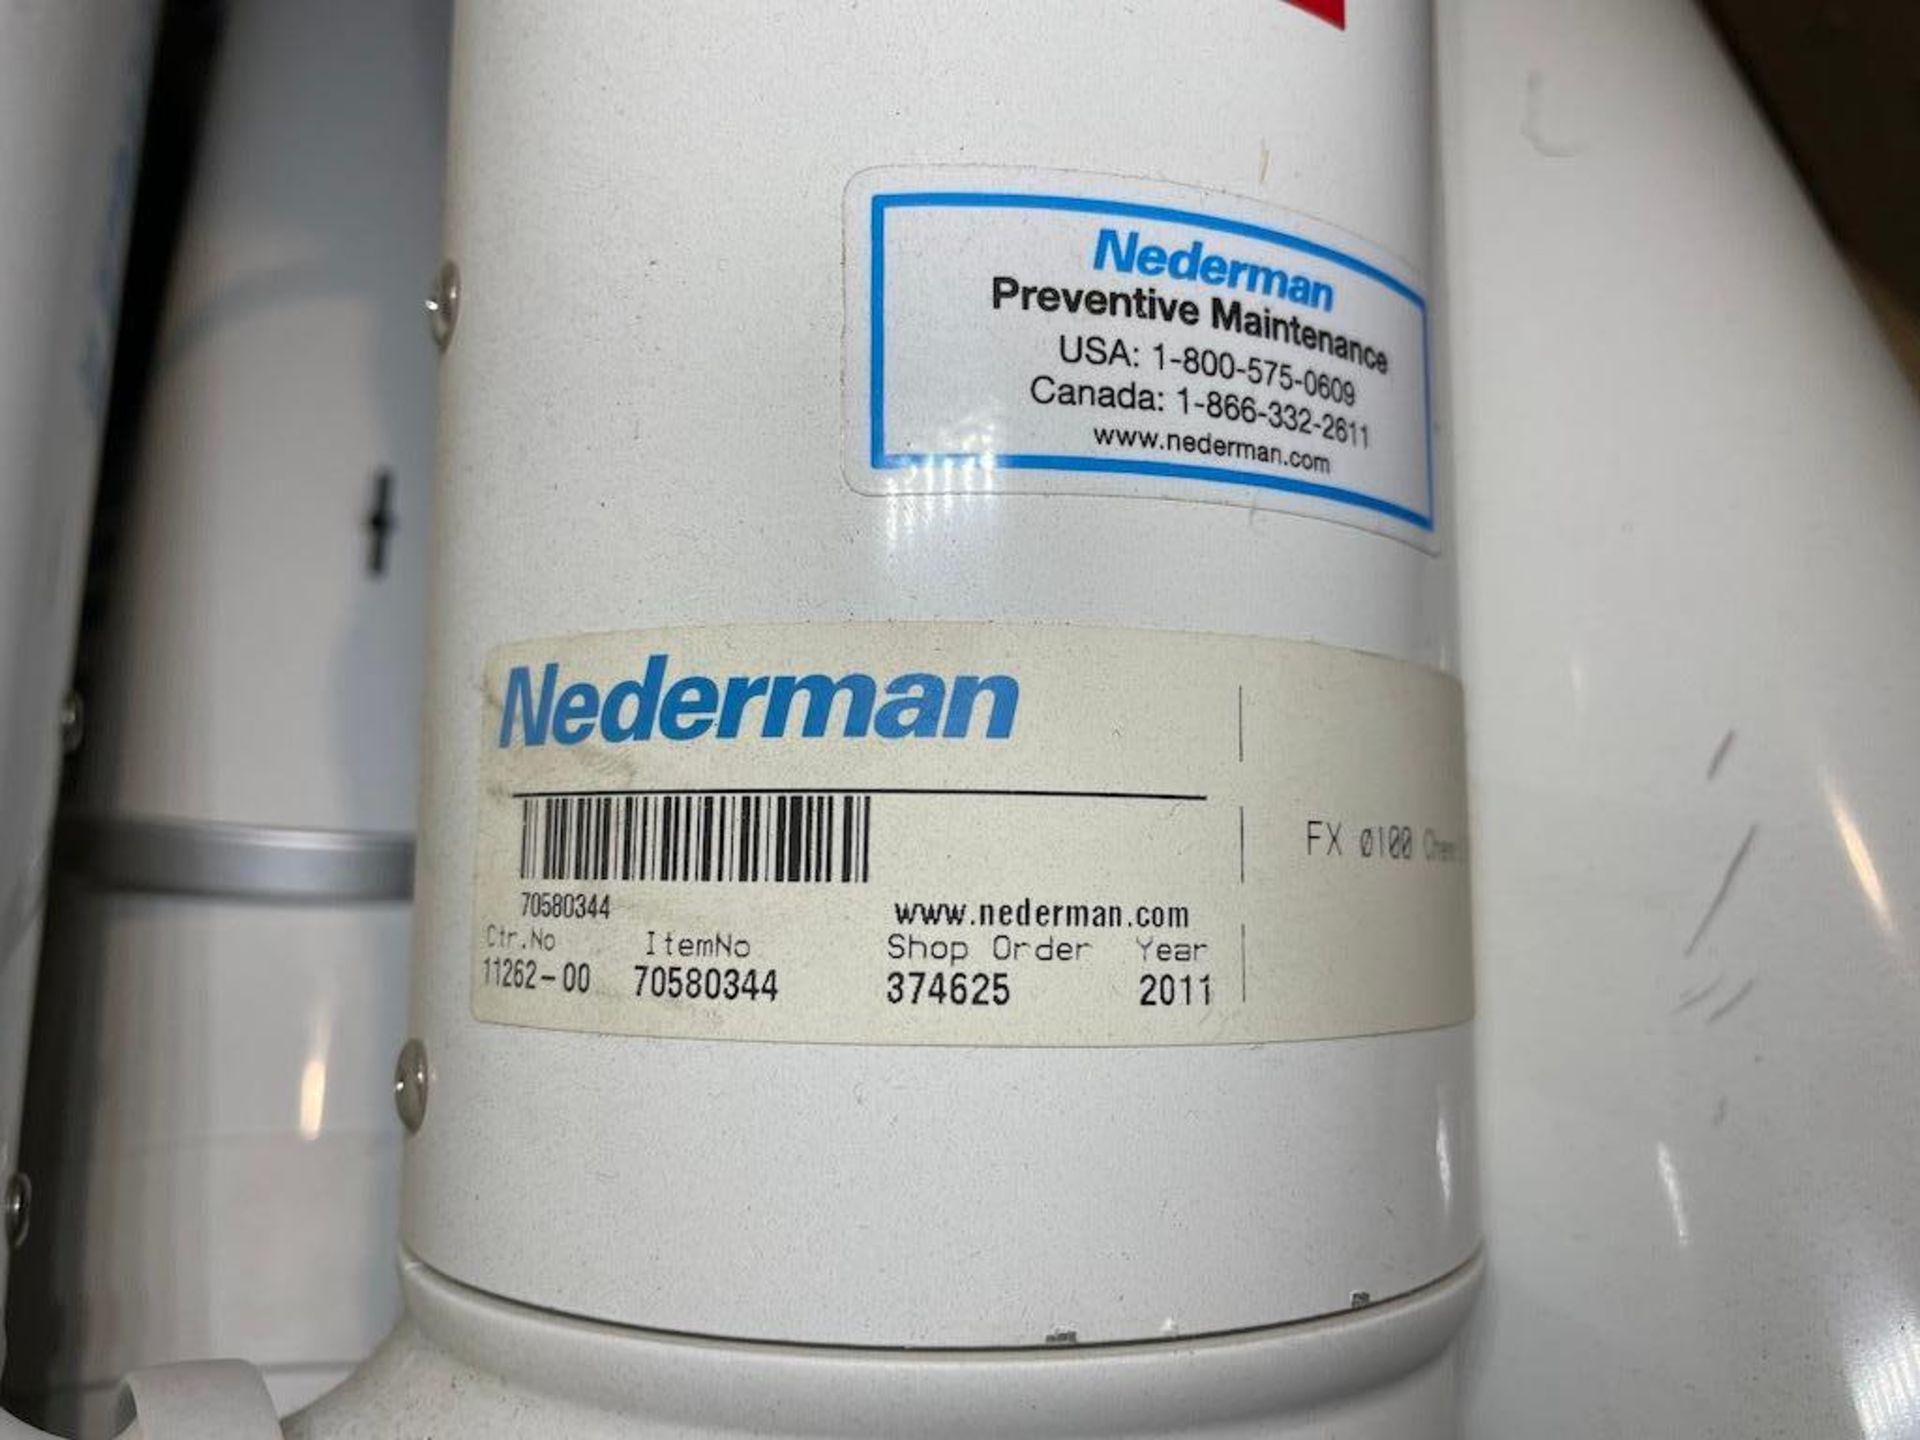 SKID W APPROX (9) NEDERMAN FLEX PIPES FOR FUME EXTRACTION - Image 2 of 3